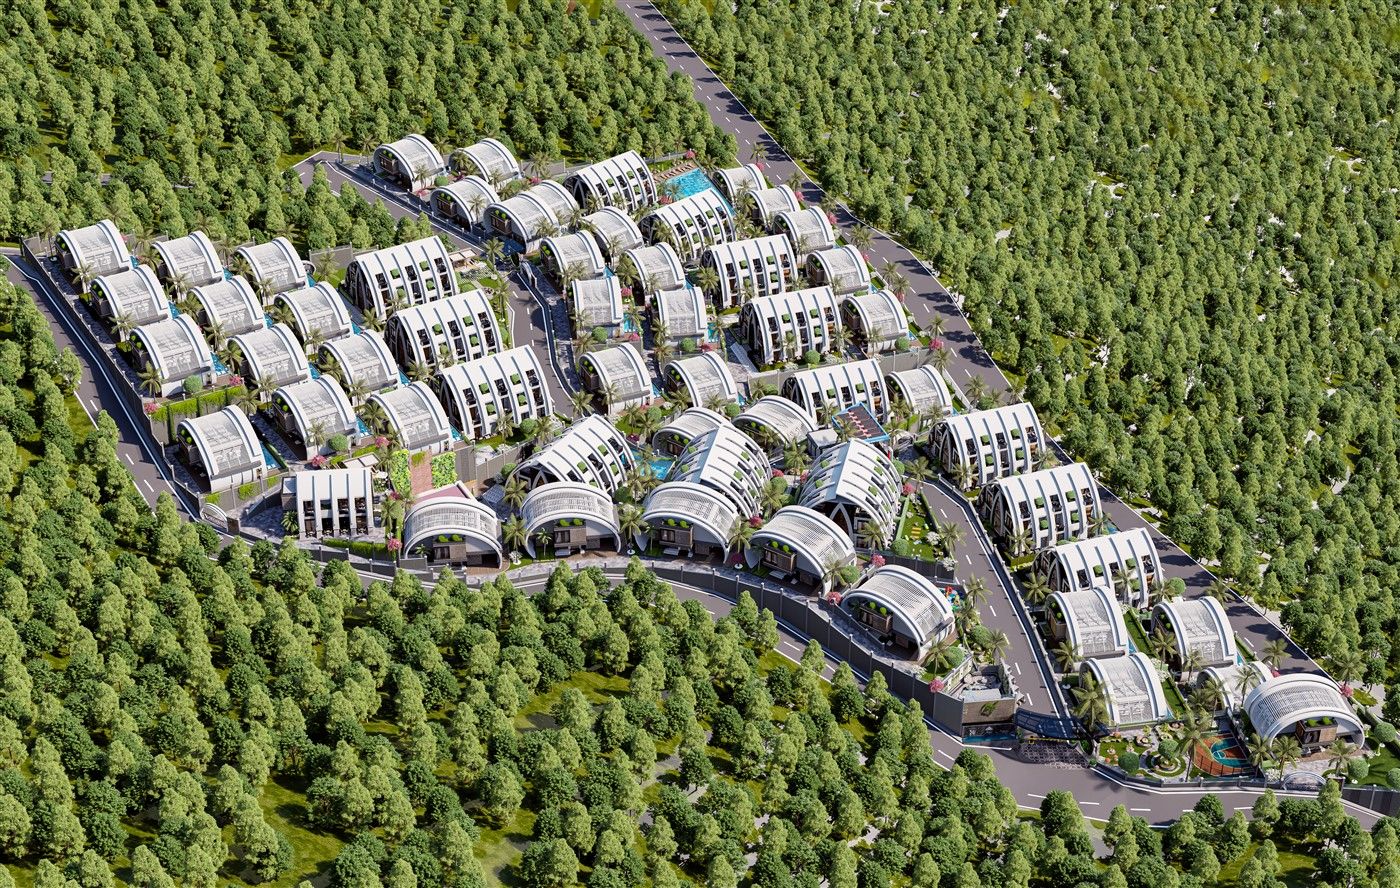 Large-scale project of villas and apartments surrounded by greenery